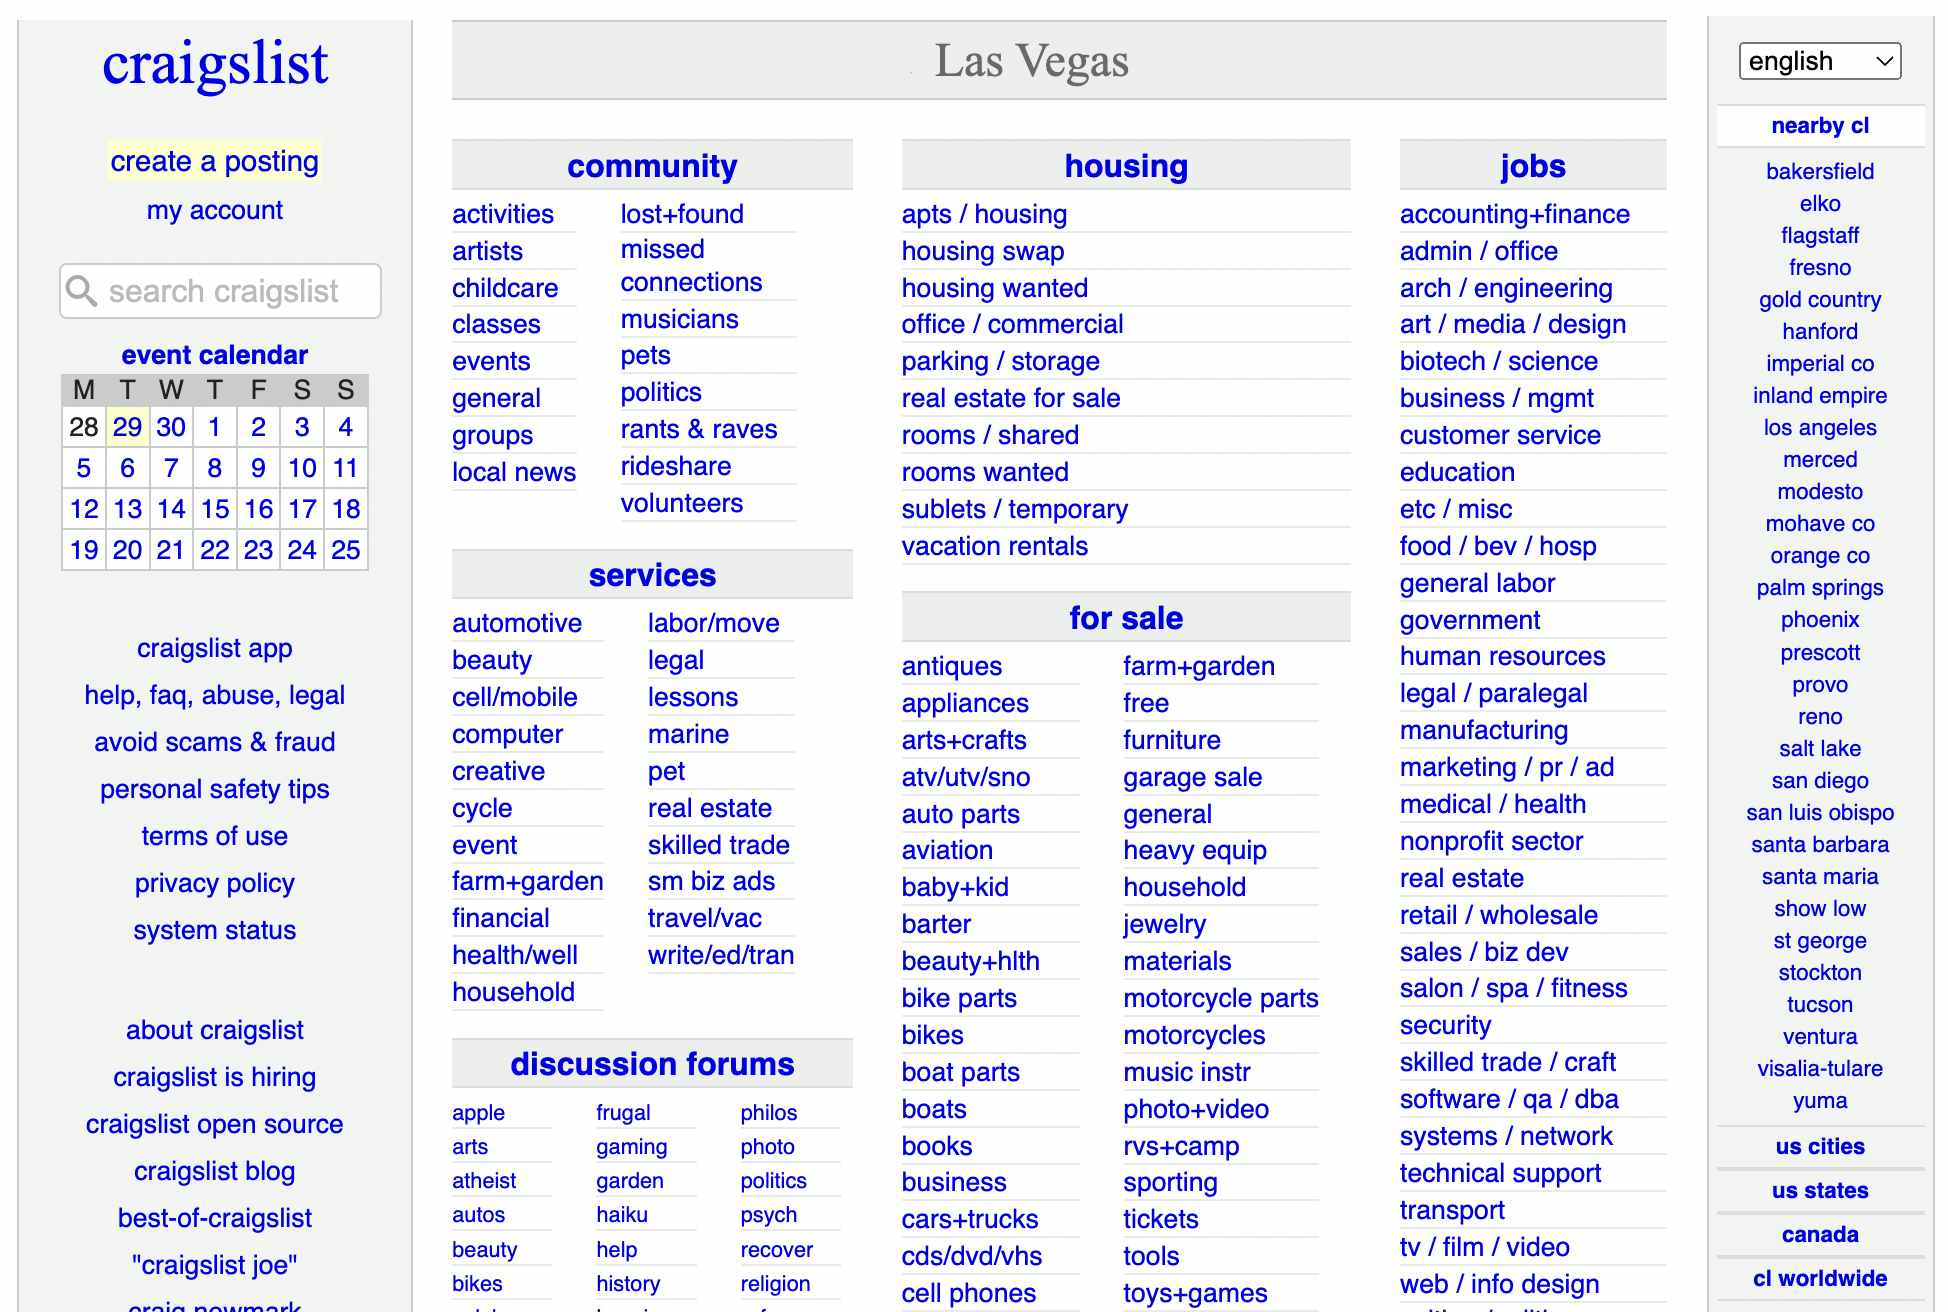 A screenshot of the craigslist home page